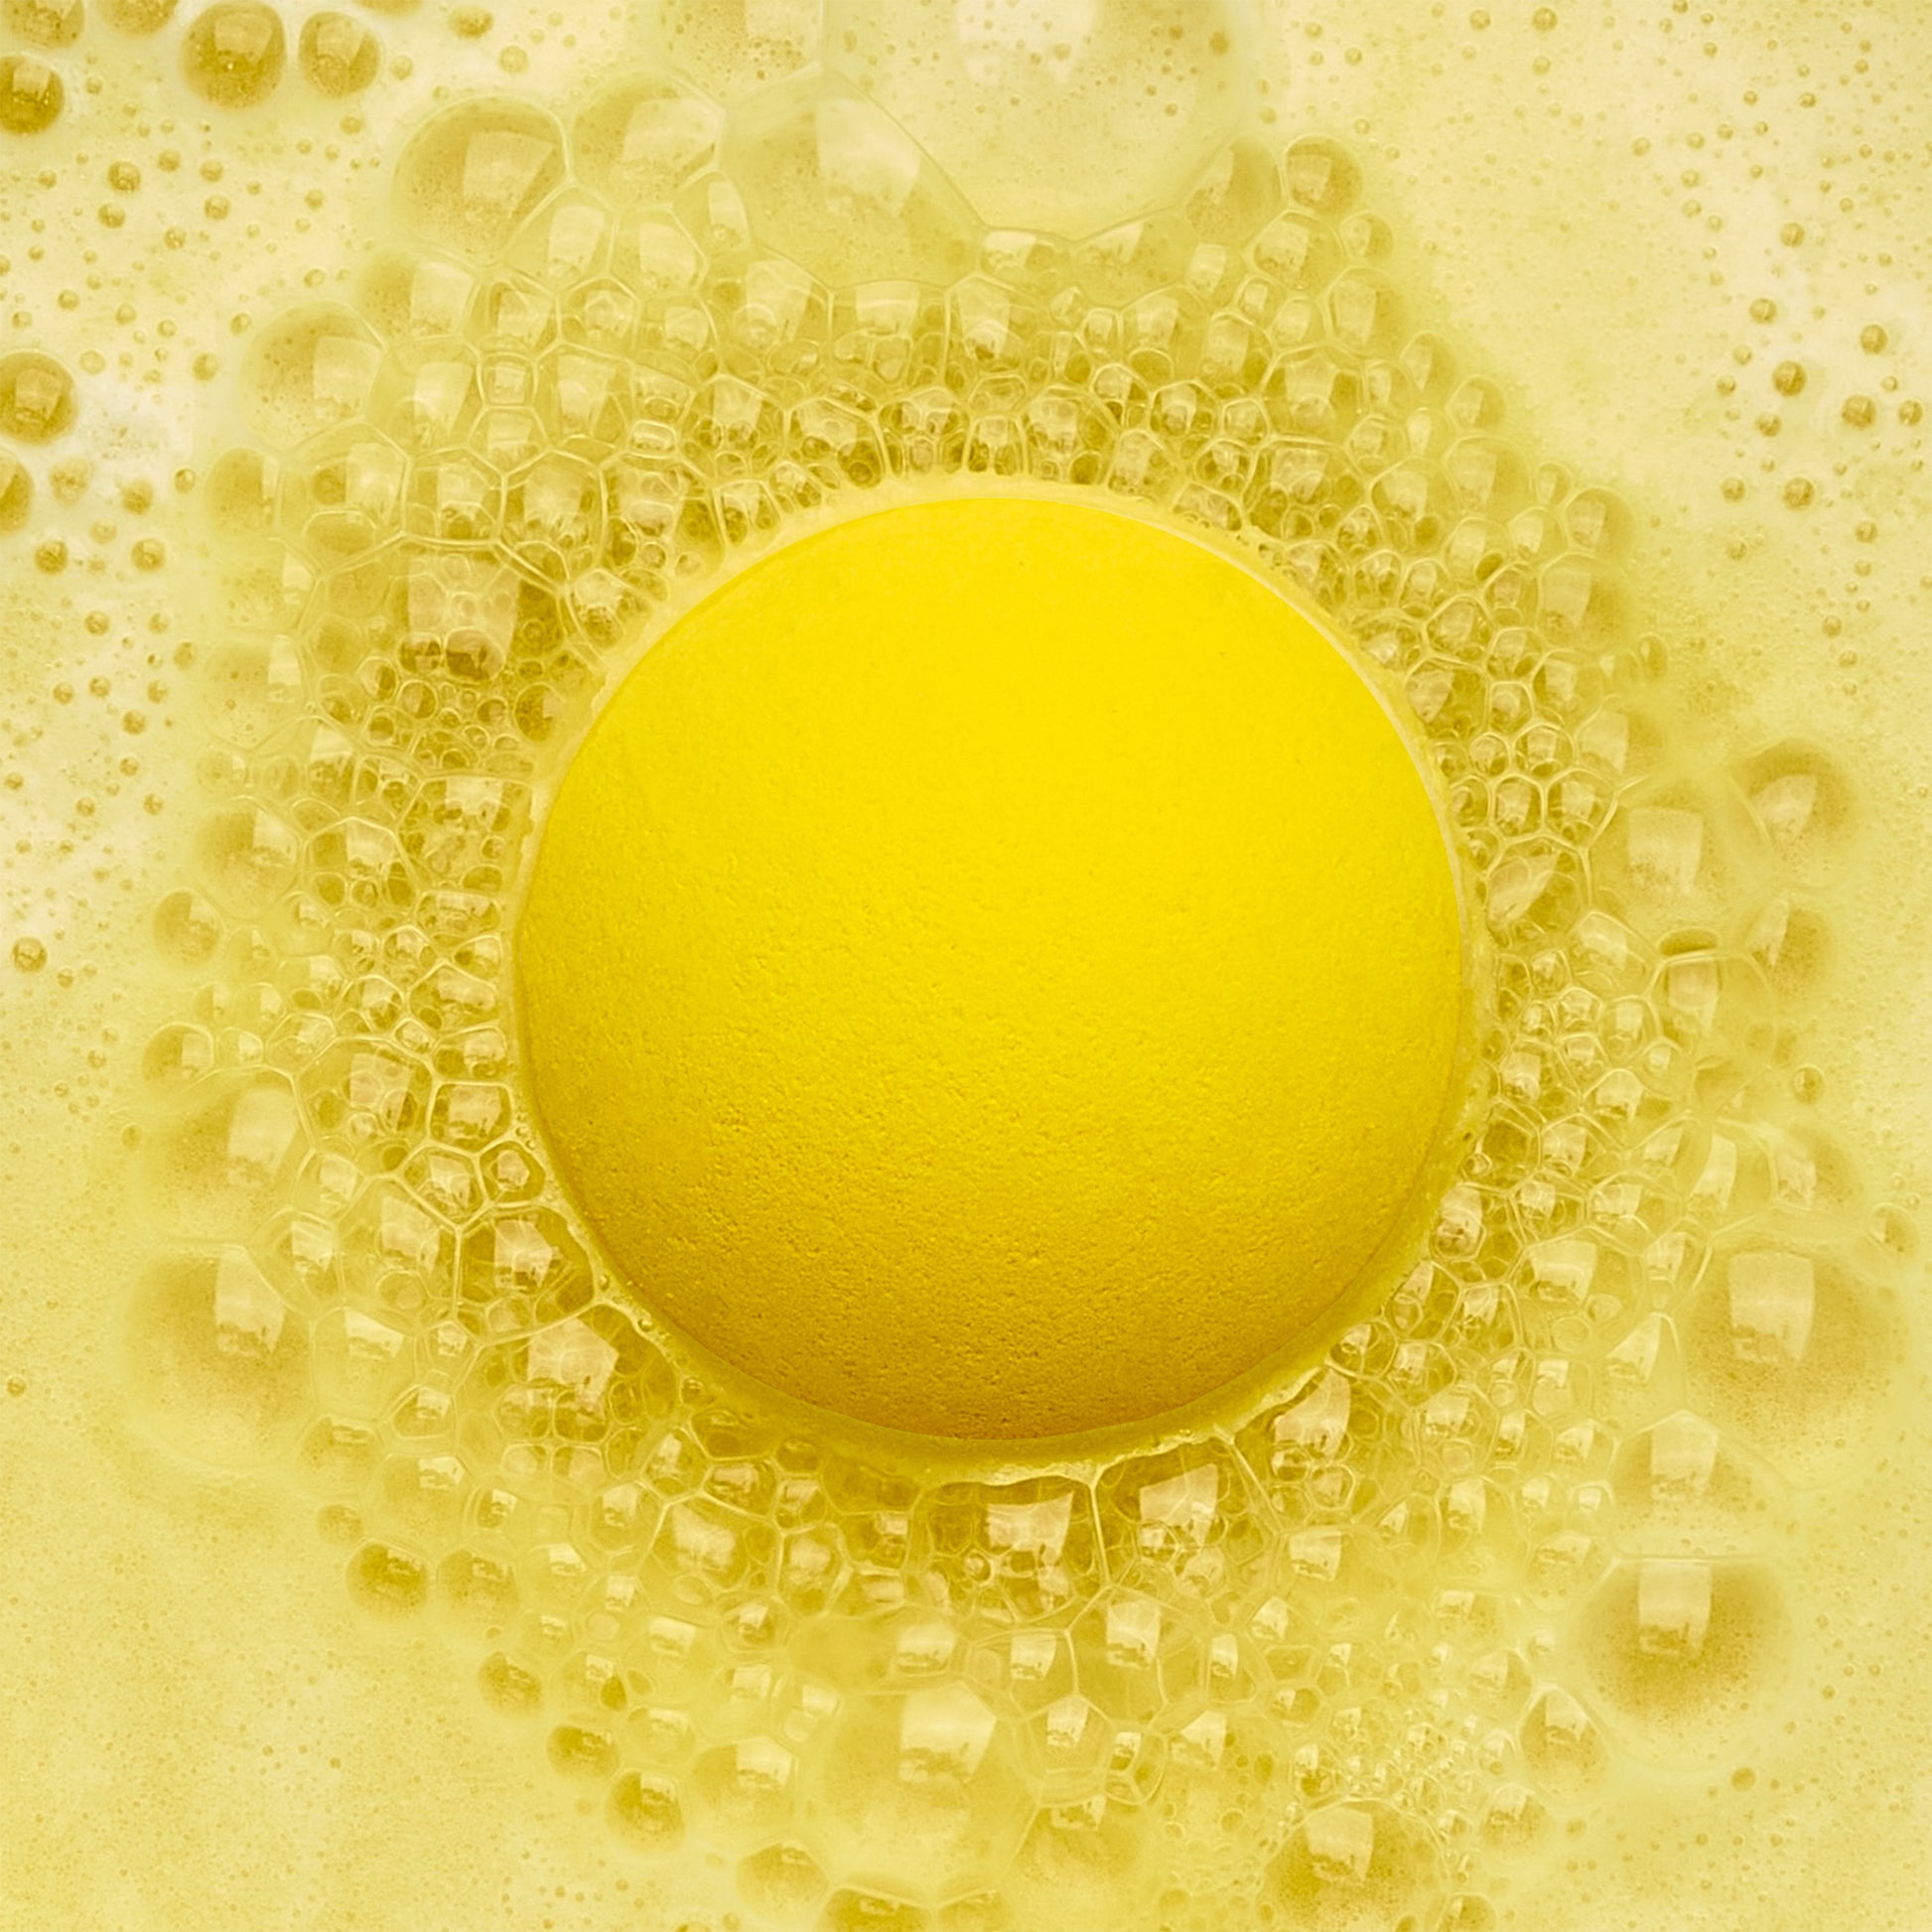 Yellow fizzing bath bomb in yellow bubbly water